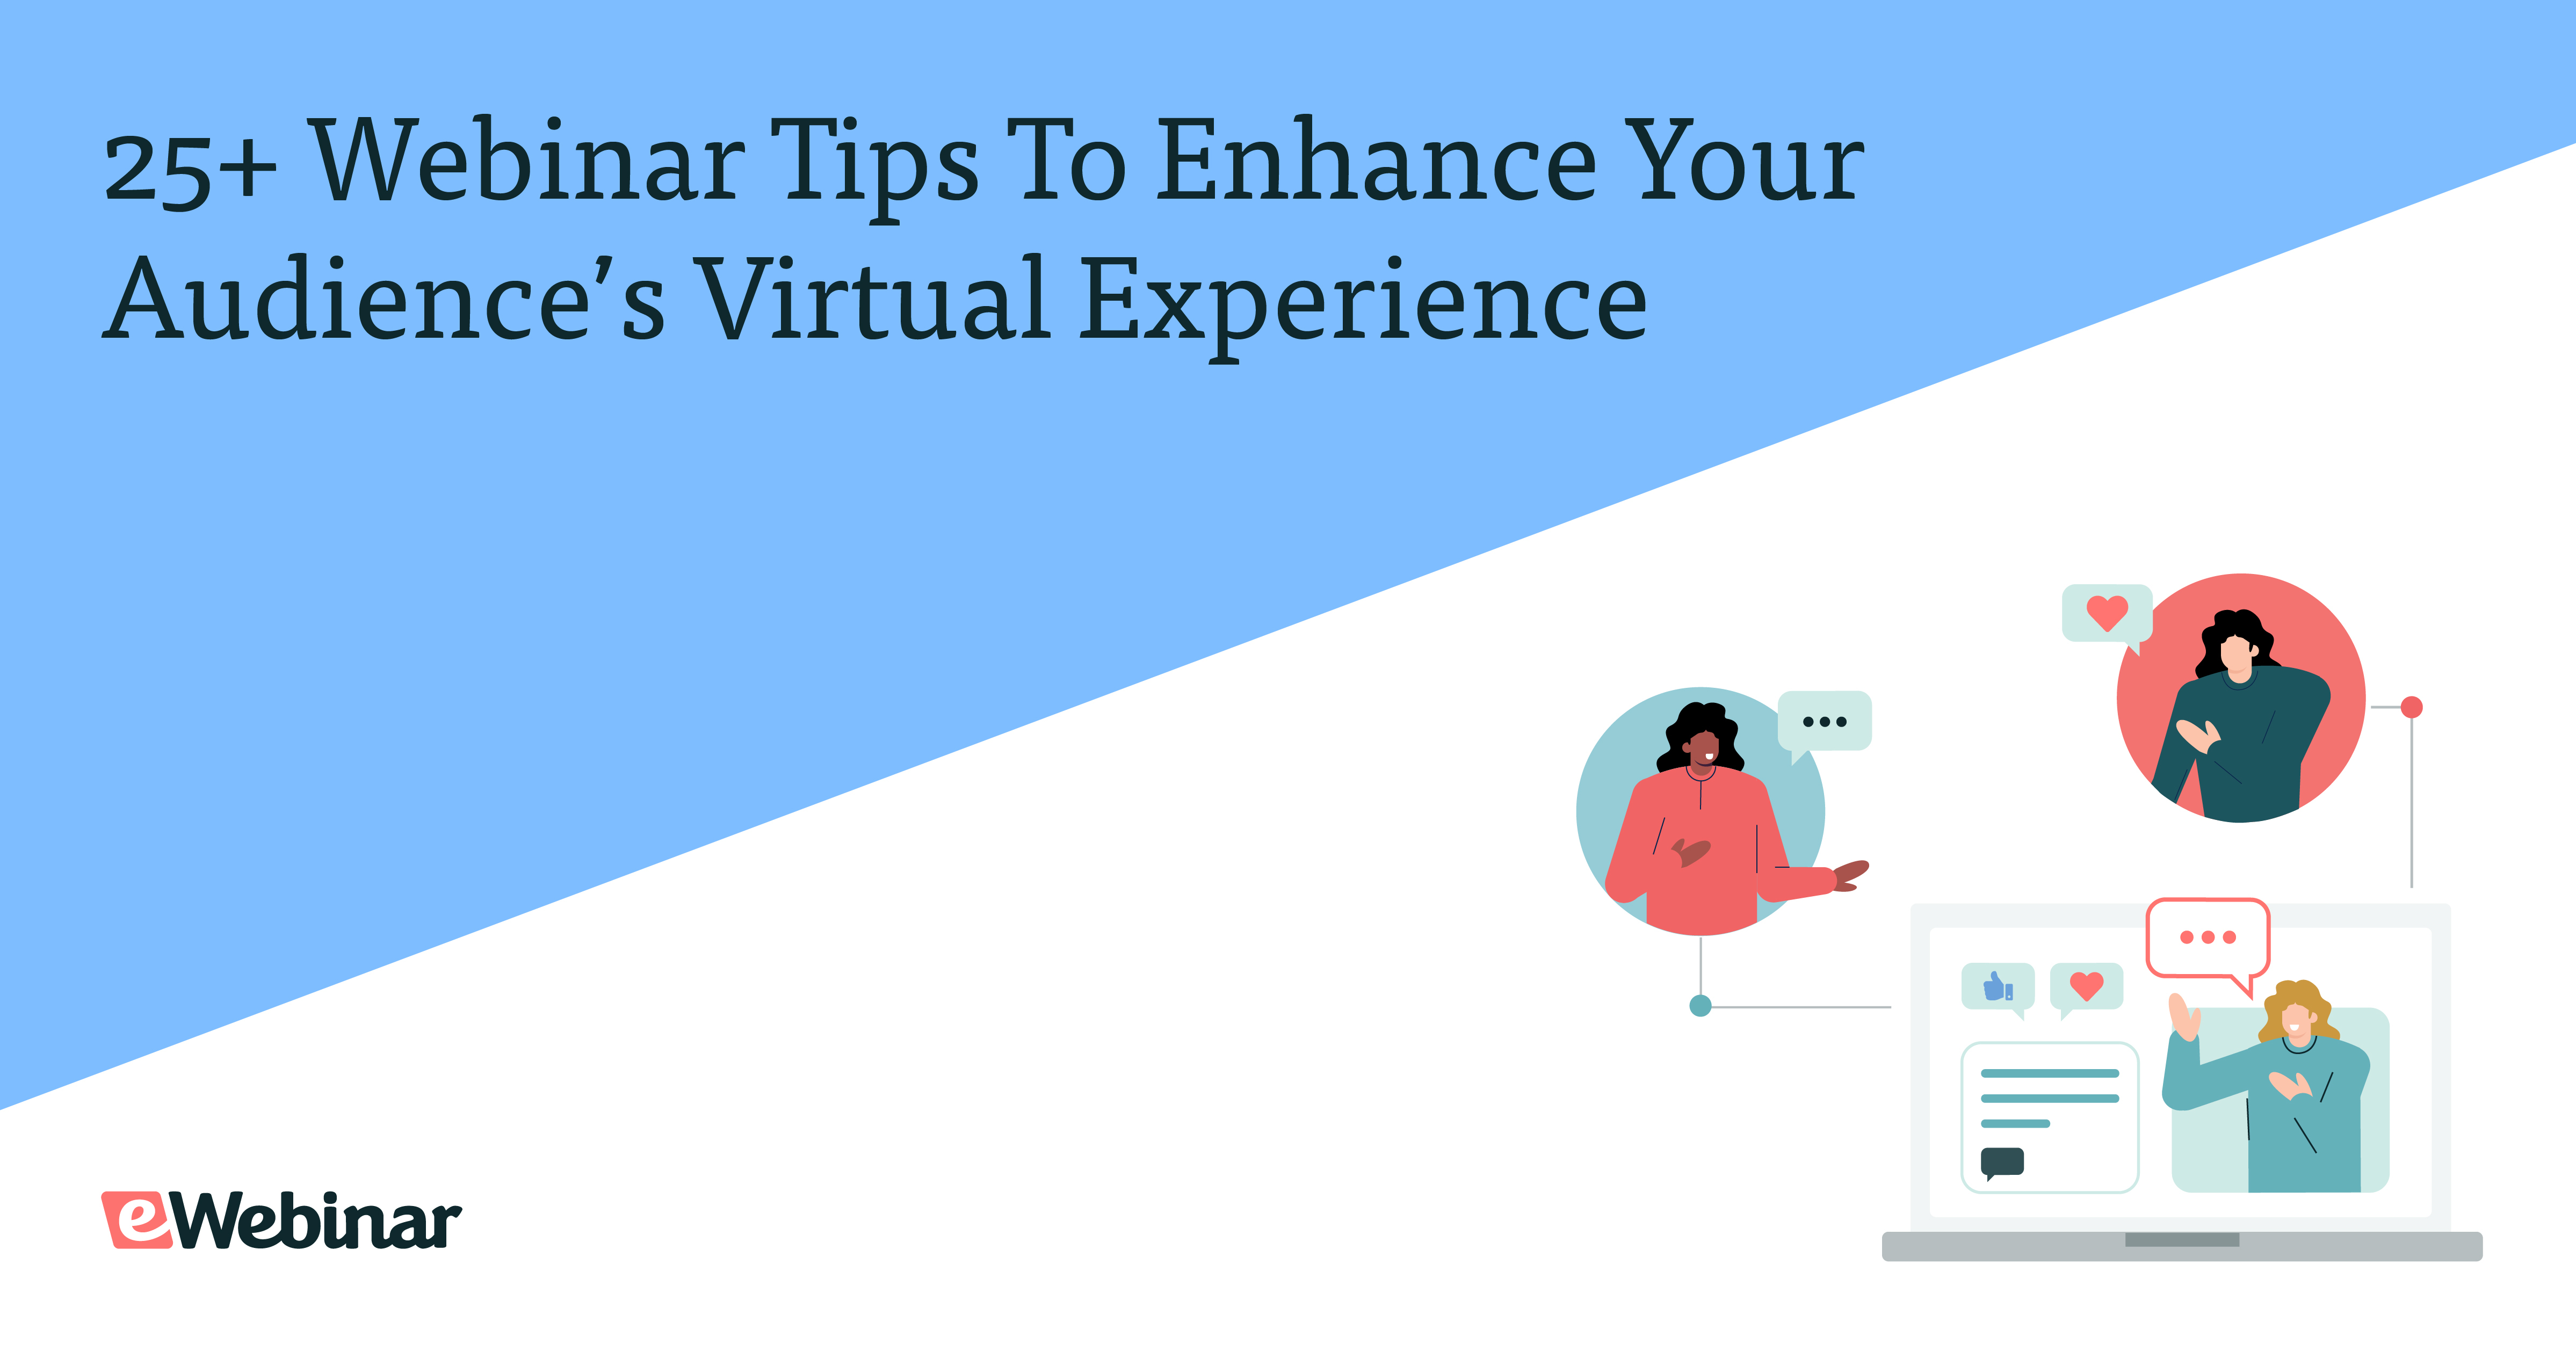 25+ Webinar Tips To Enhance Your Audience’s Virtual Experience